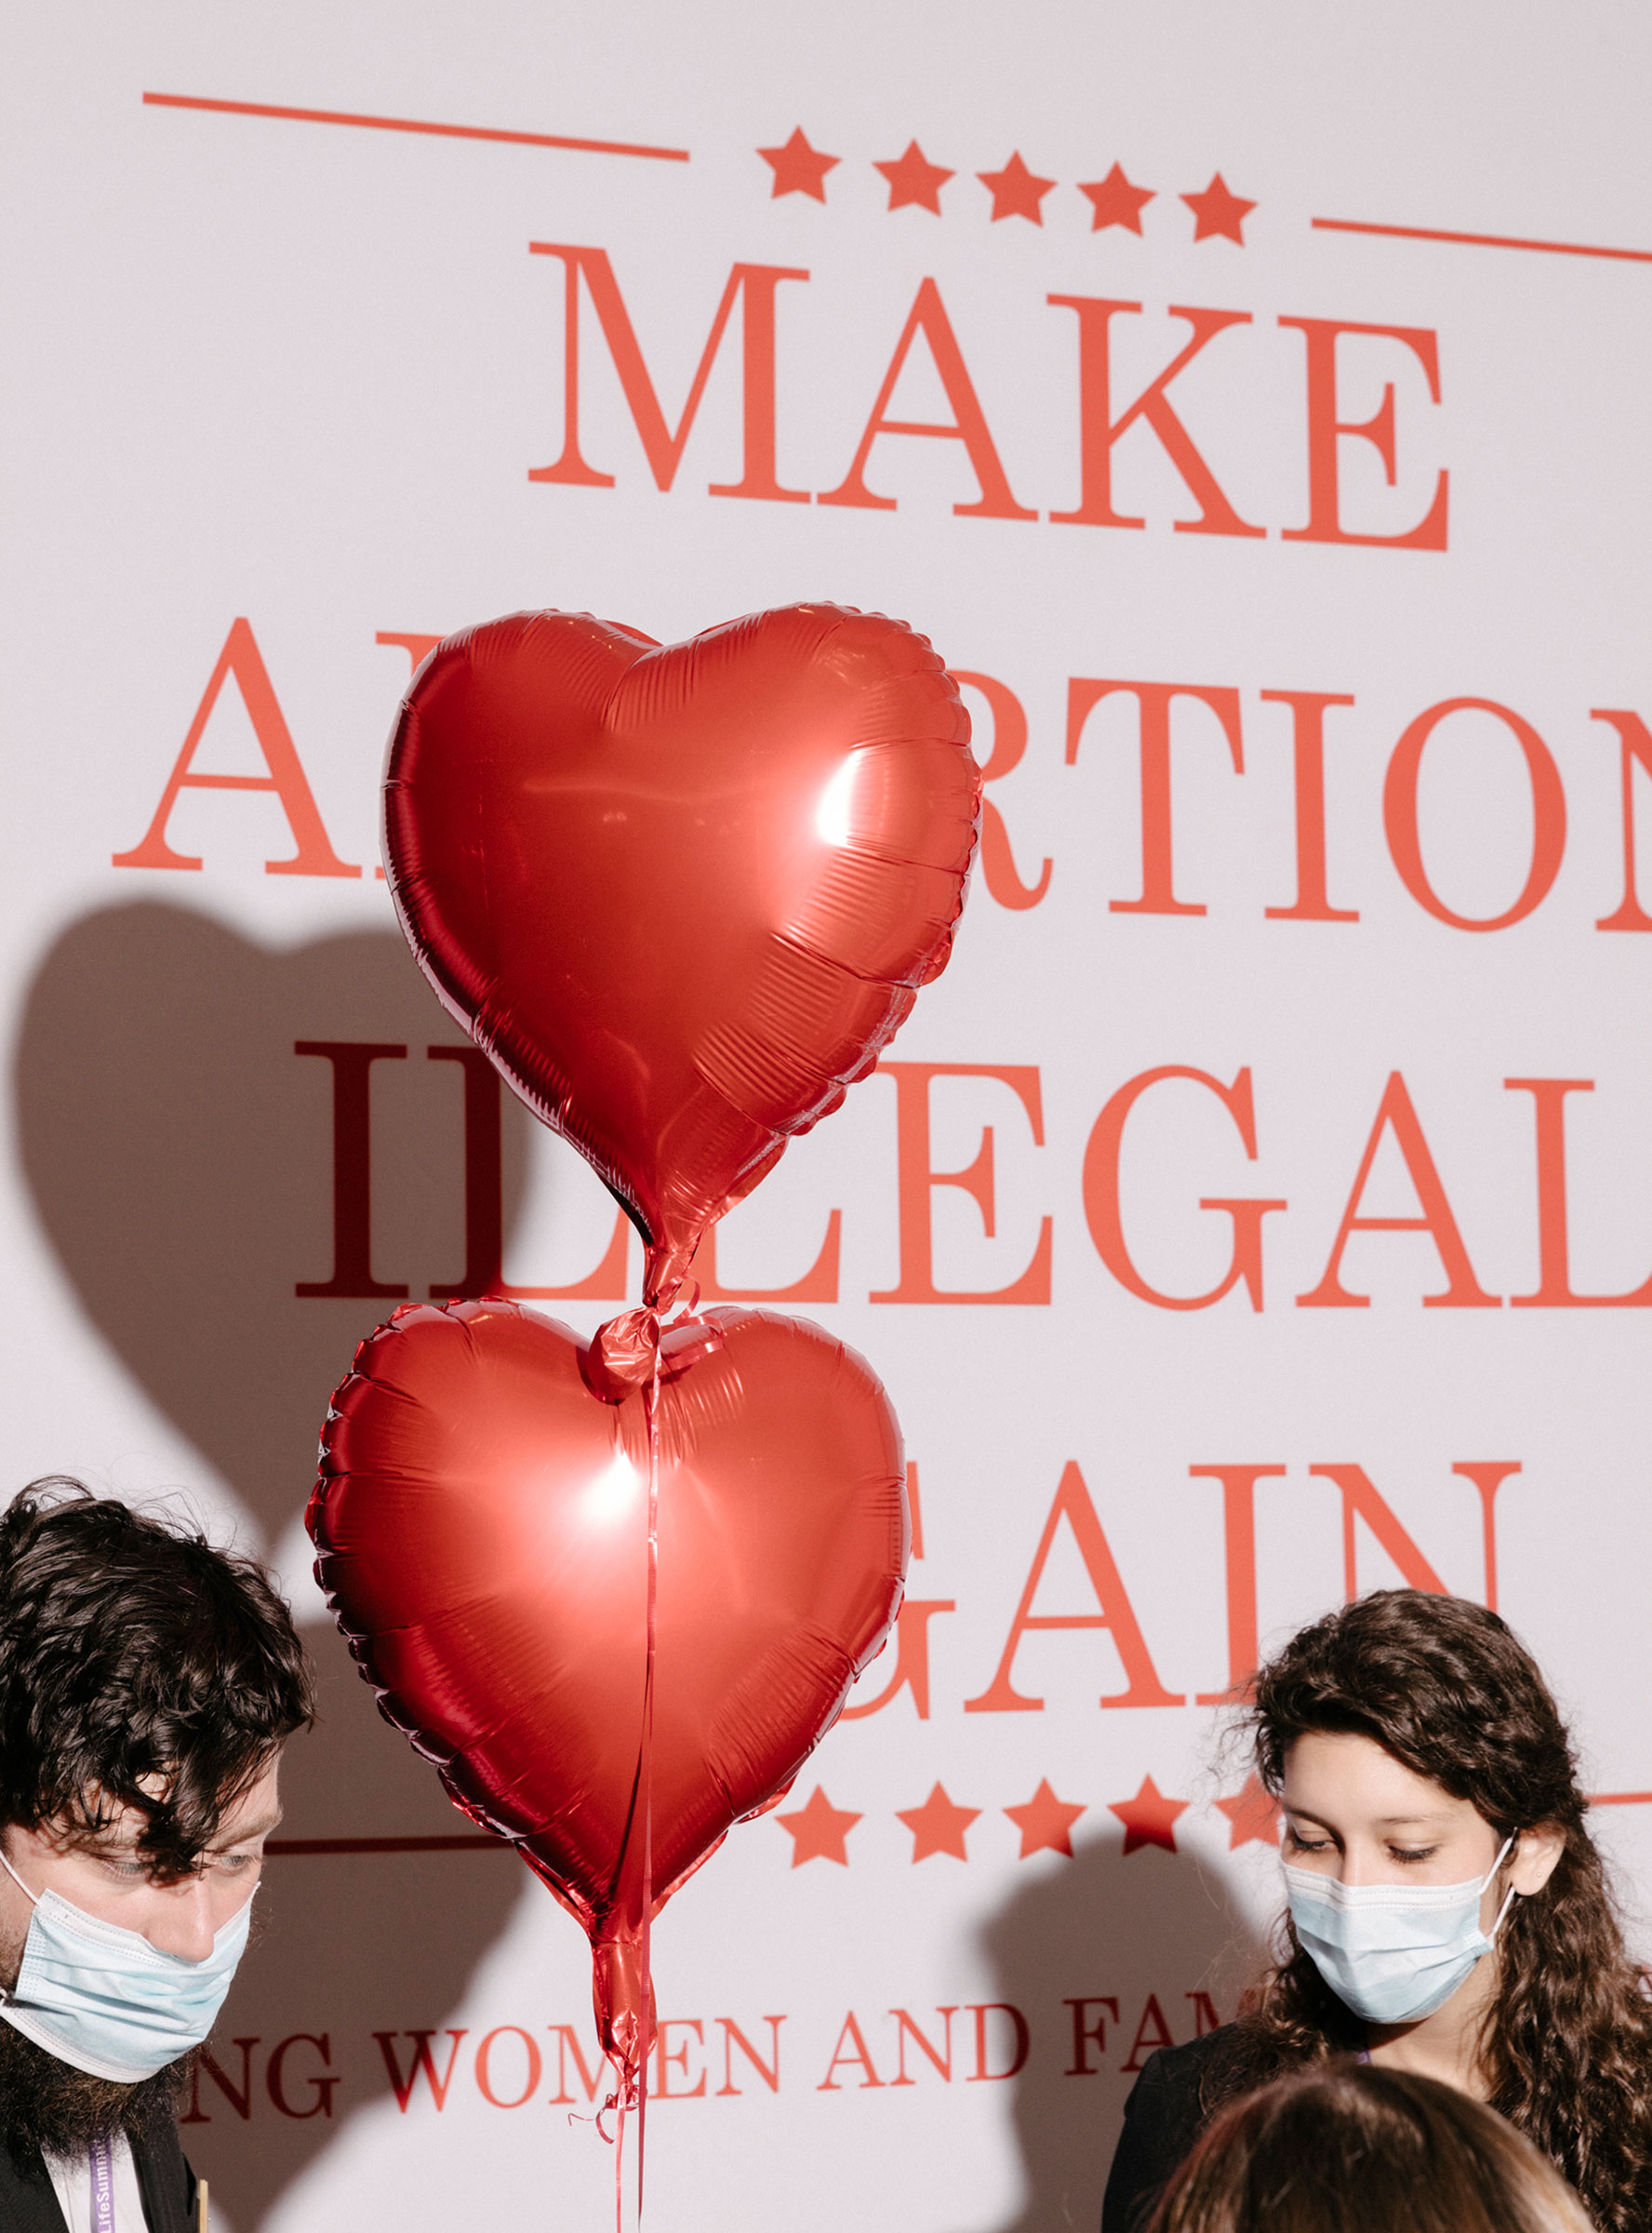 The Battle Over the Future of the Anti-Abortion Movement if the Supreme Court Overturns Roe v. Wade